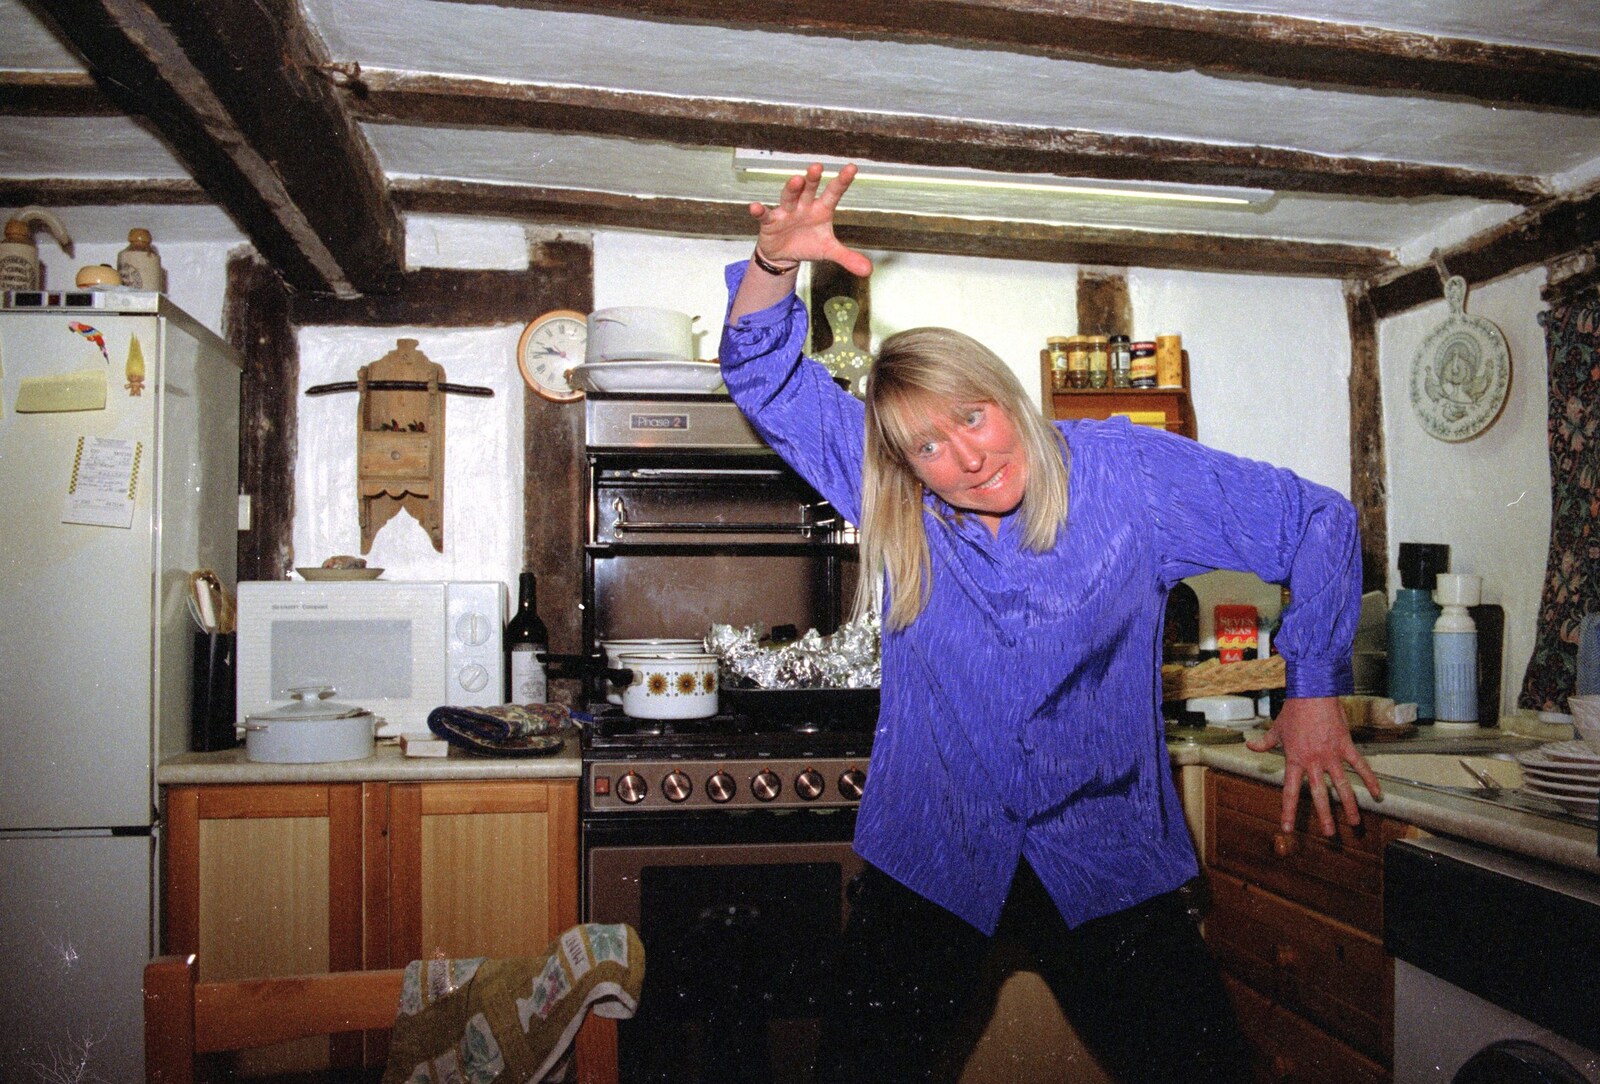 Sue does another crazy move from Lunch and Dinner at Mad Sue's, Stuston, Suffolk - 30th March 1995